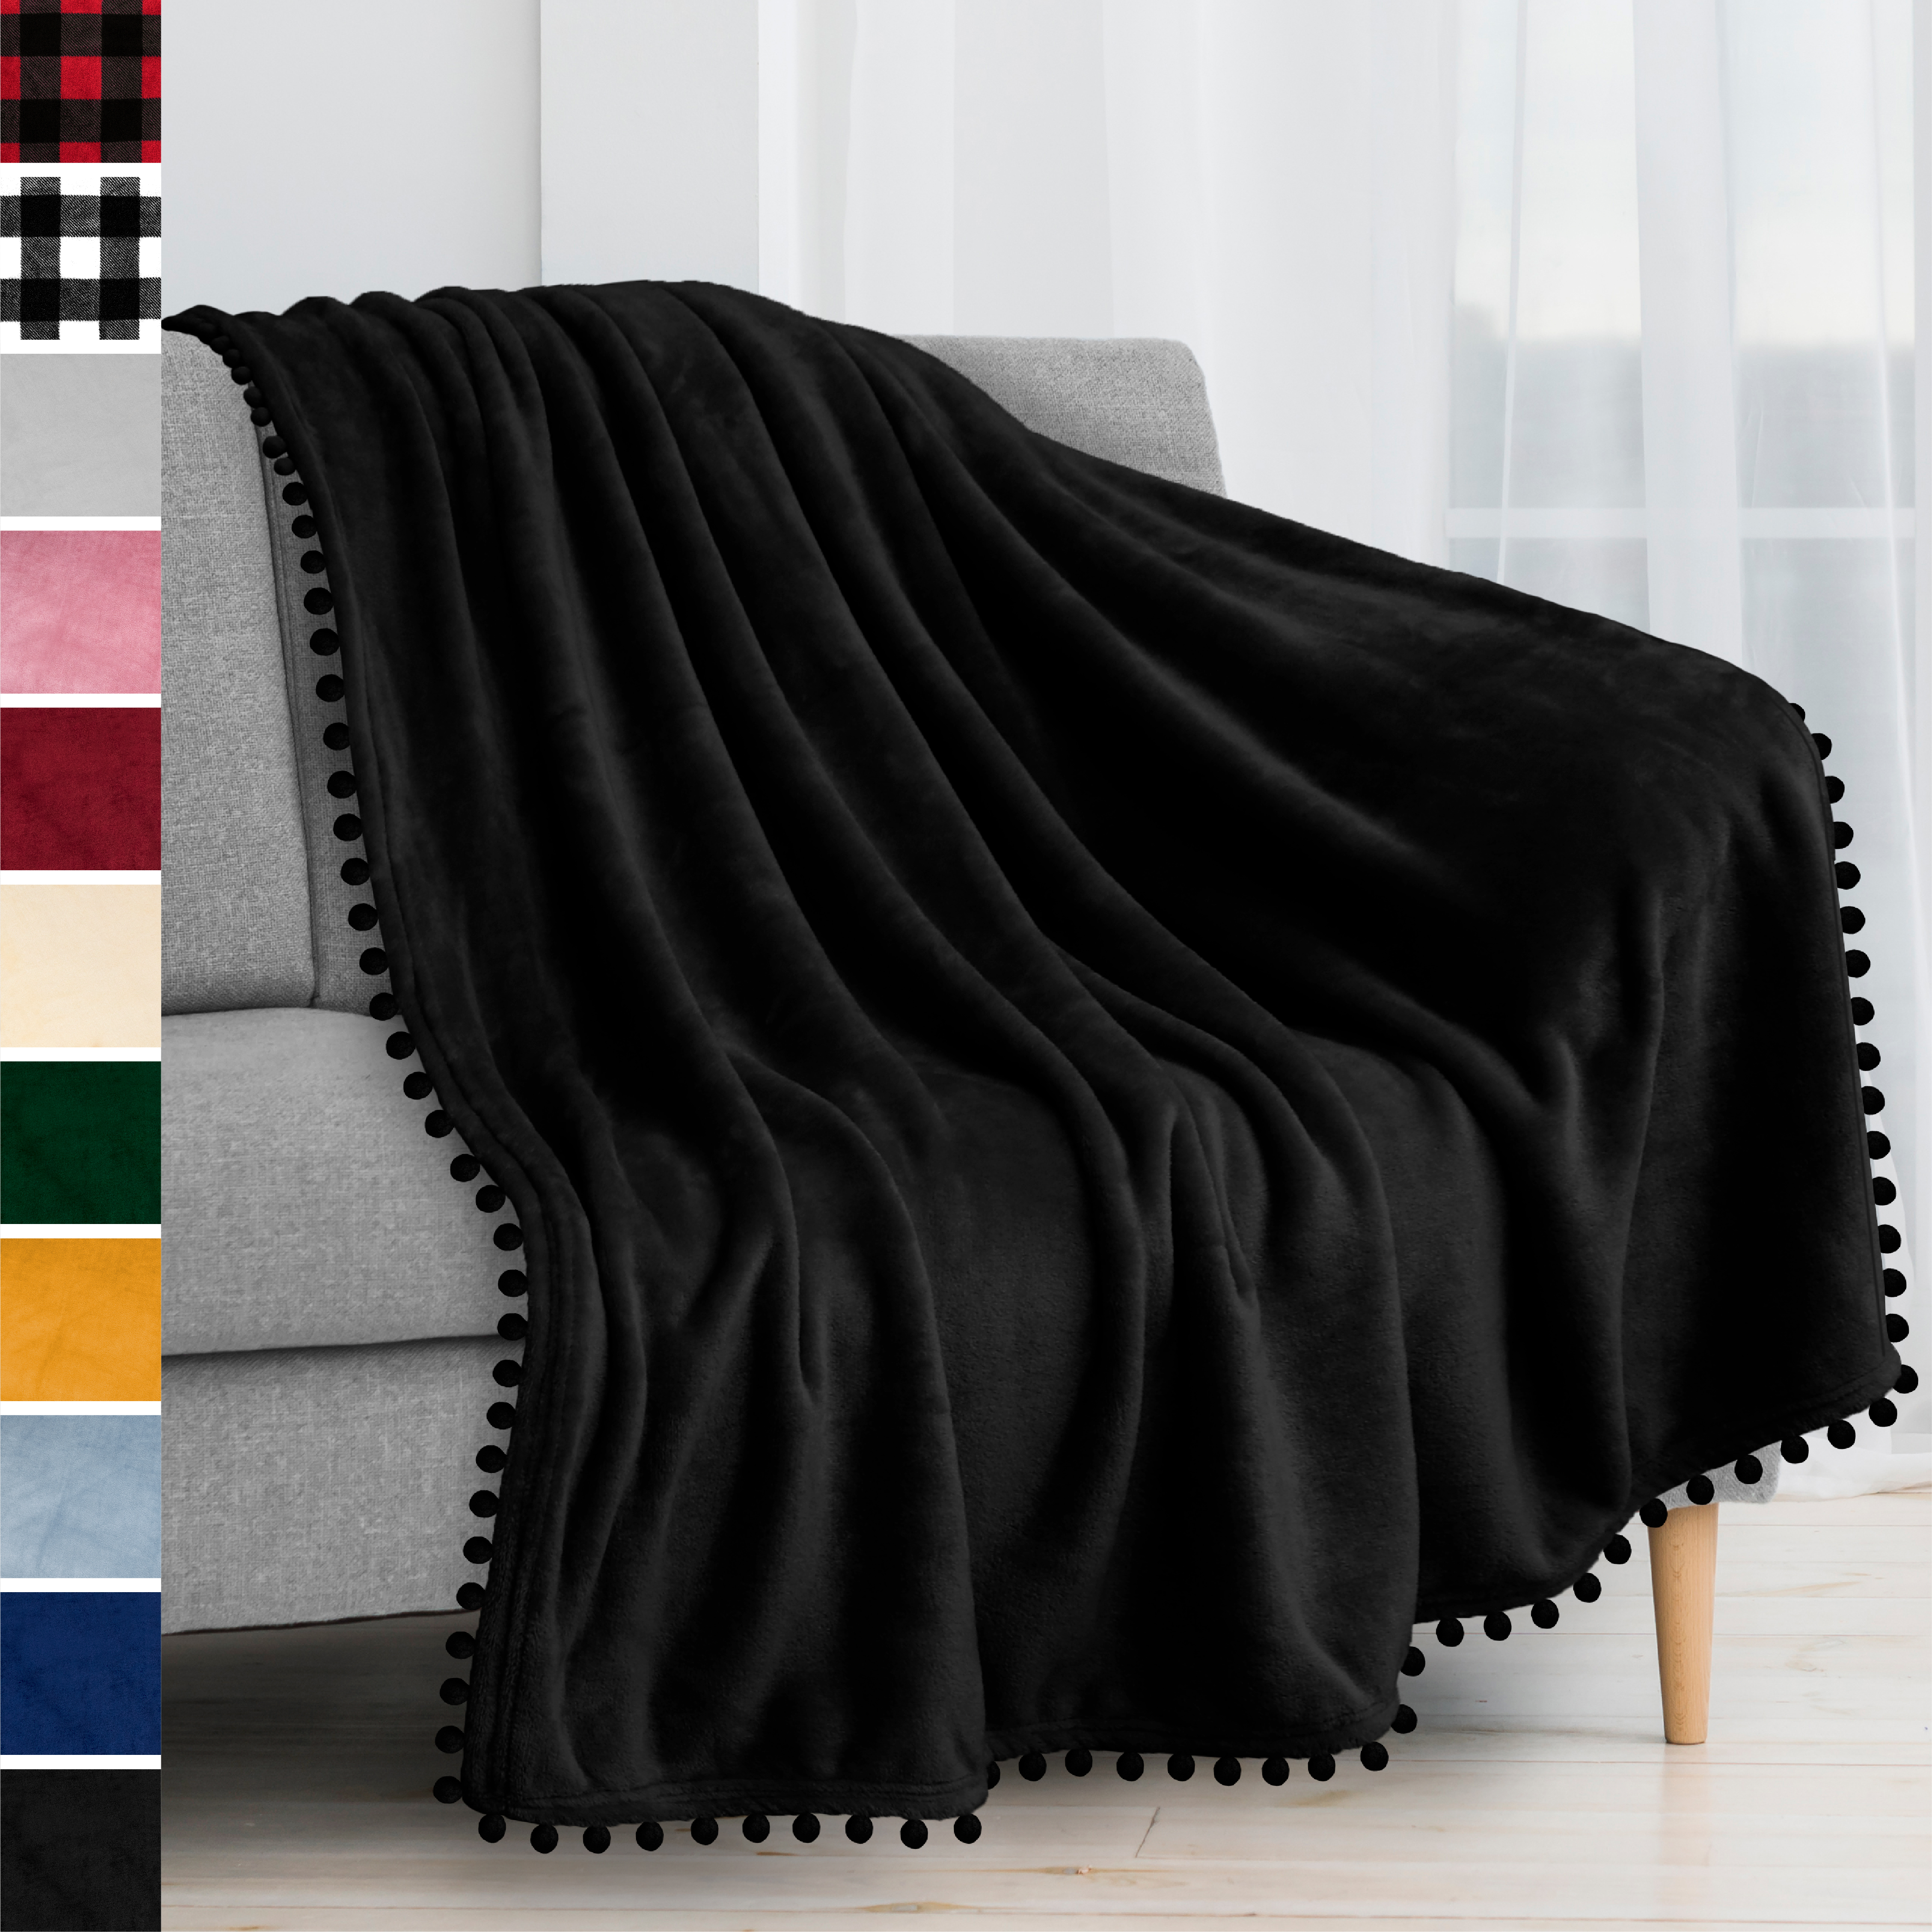 thumbnail 2 - Fleece Throw Blanket with Pom Pom Fringe Super Soft Lightweight Bed Couch Home